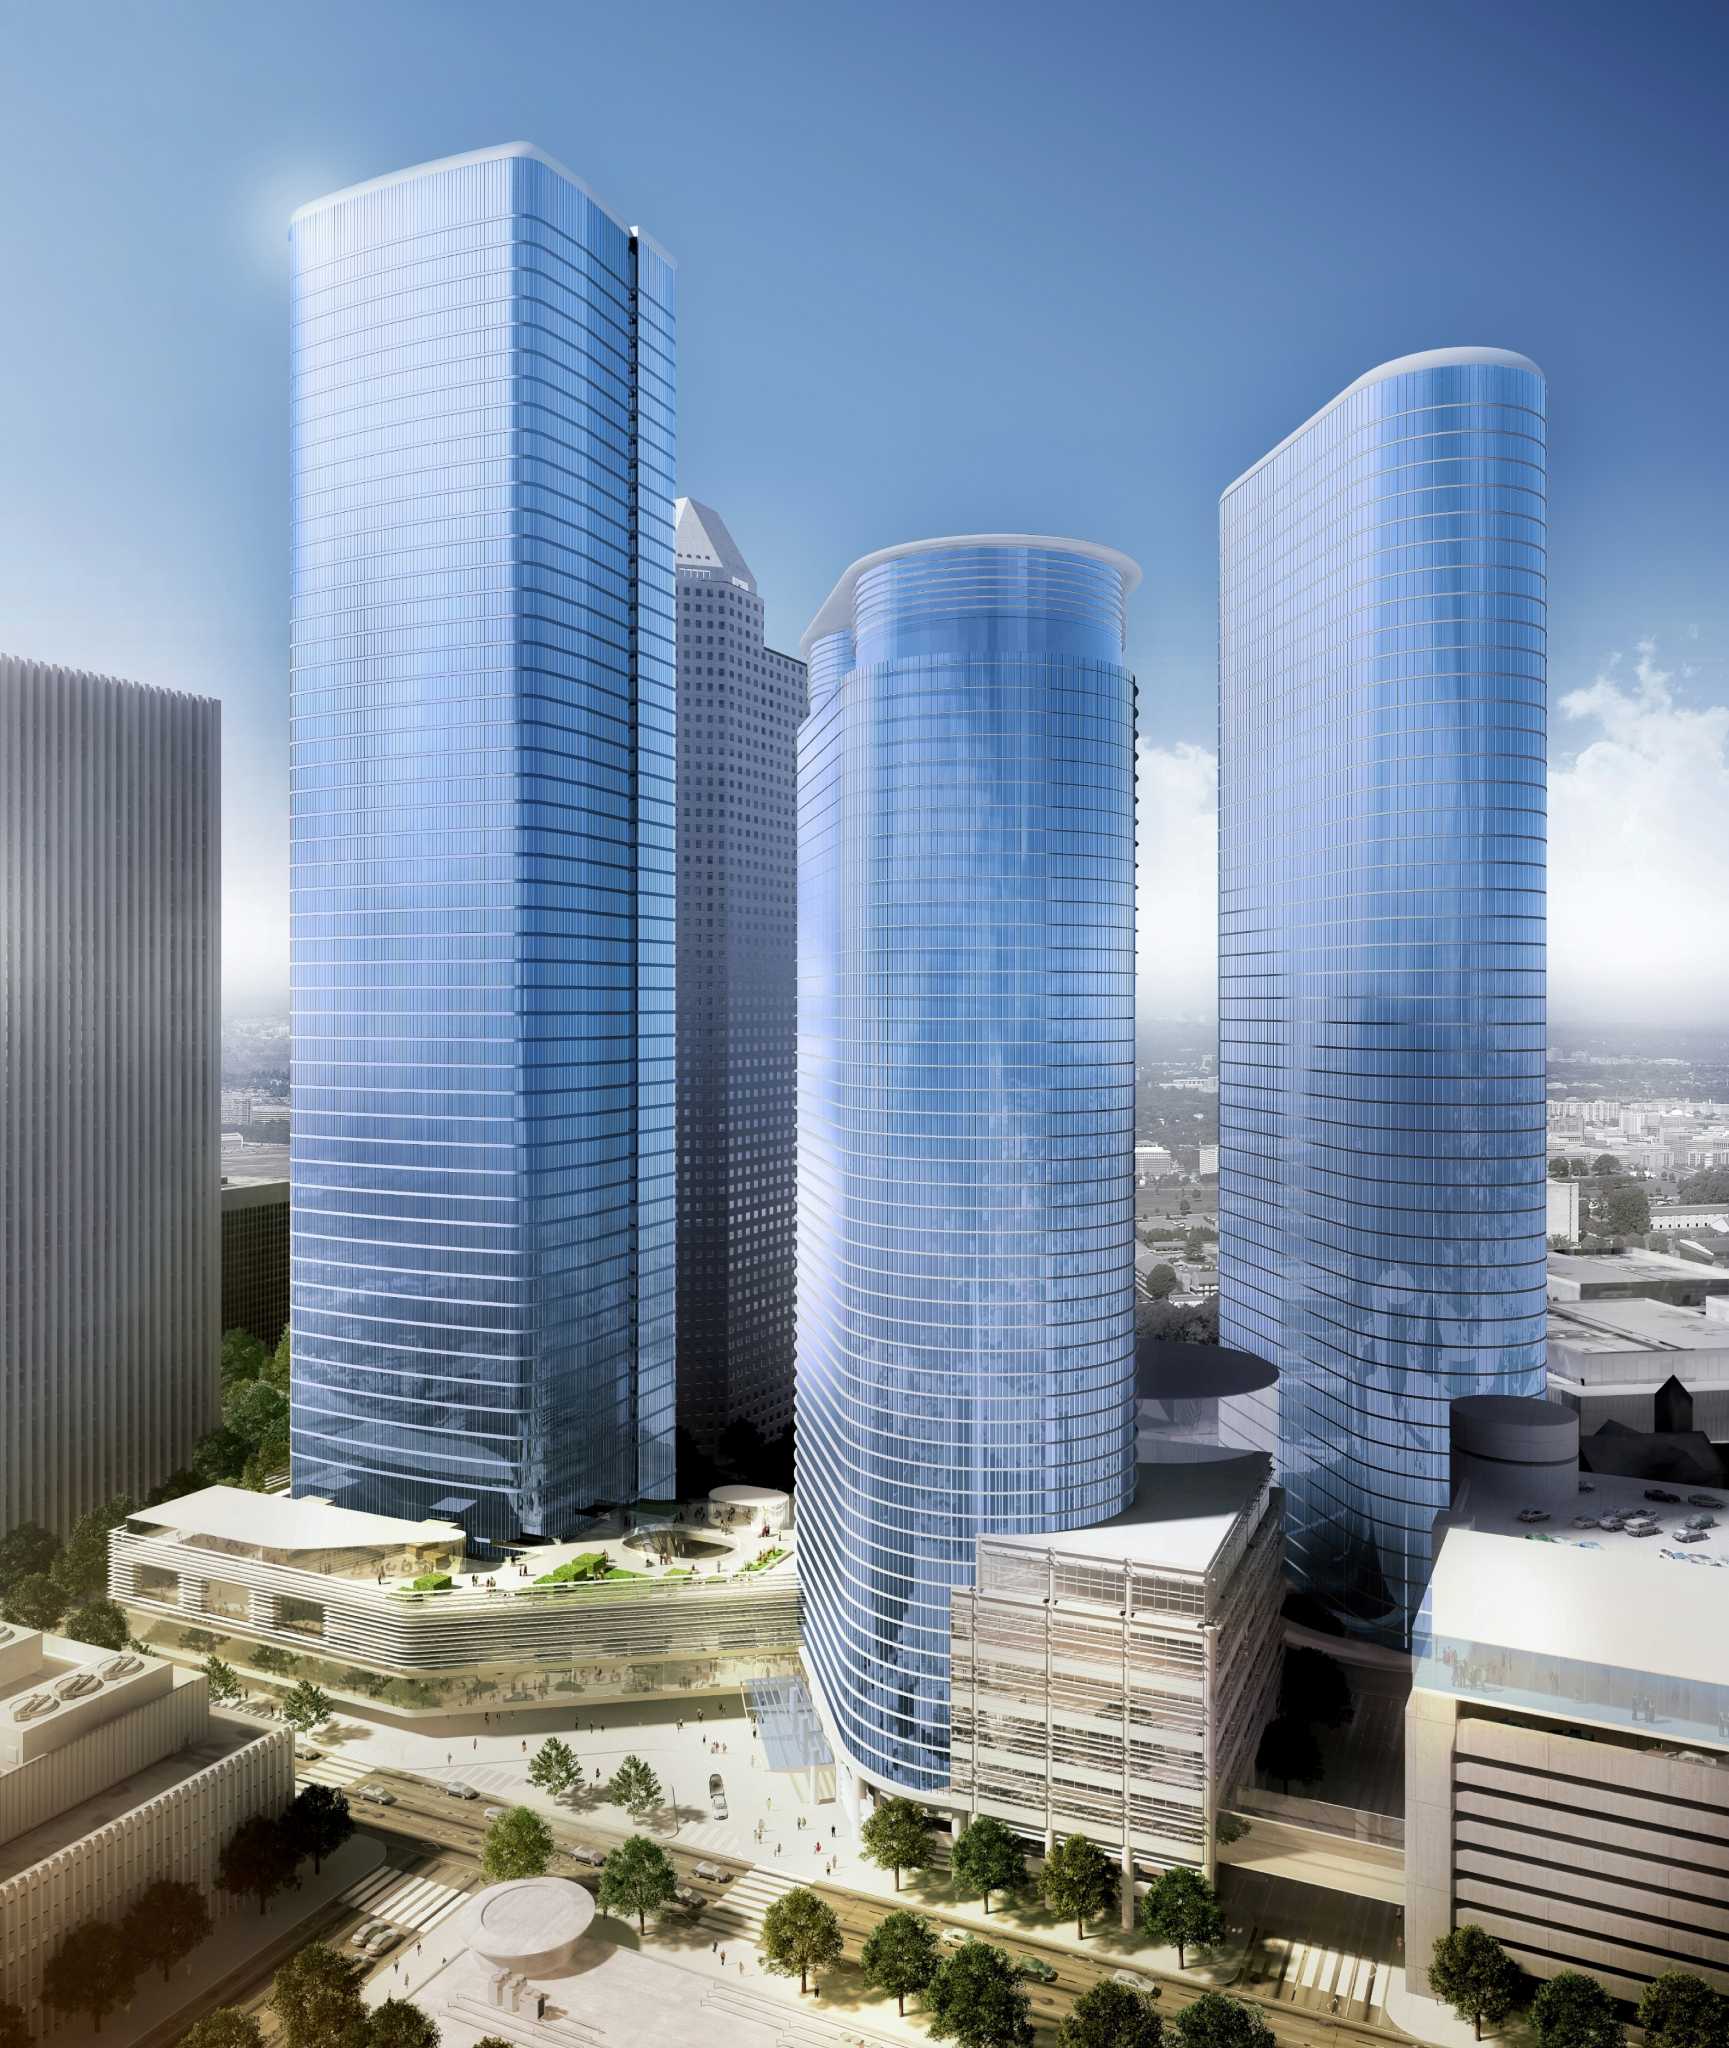 chevron puts downtown office tower on hold houstonchronicle com chevron puts downtown office tower on hold houstonchronicle com